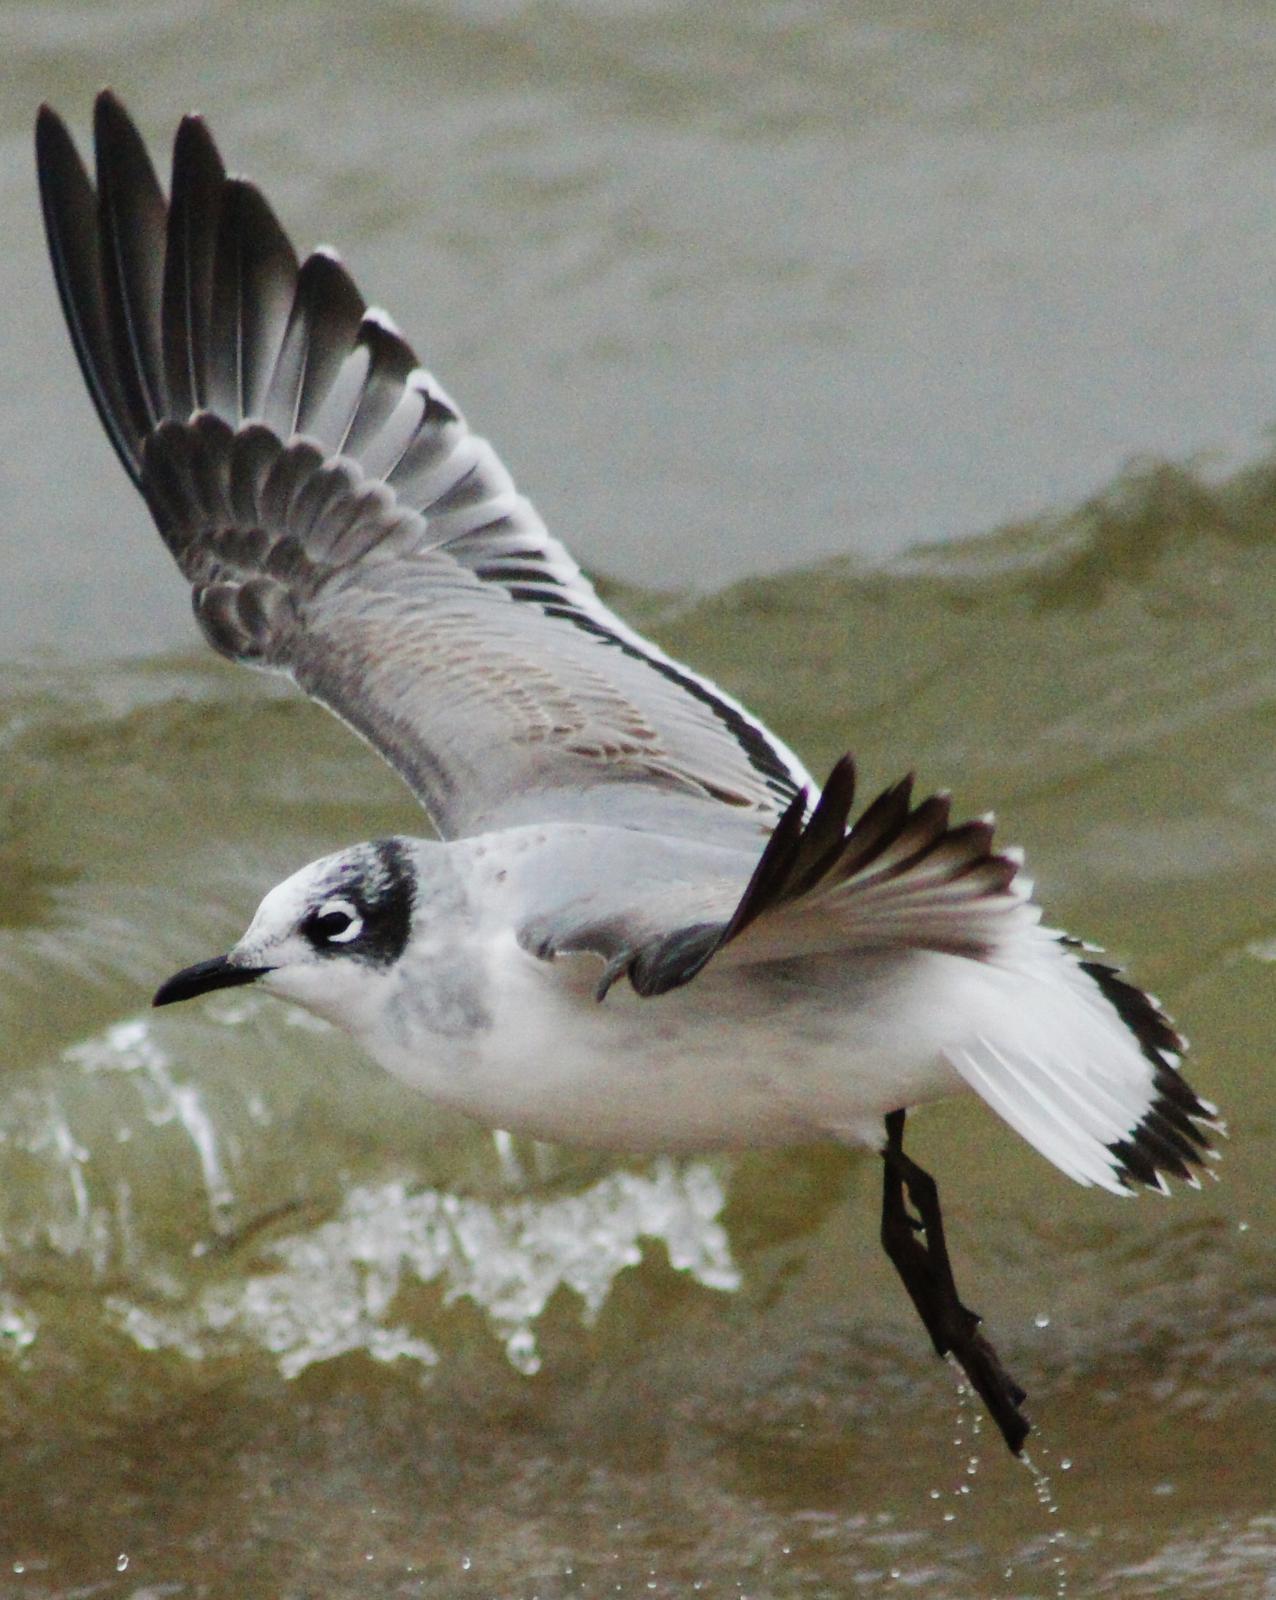 Franklin's Gull Photo by Nathan DeBruine